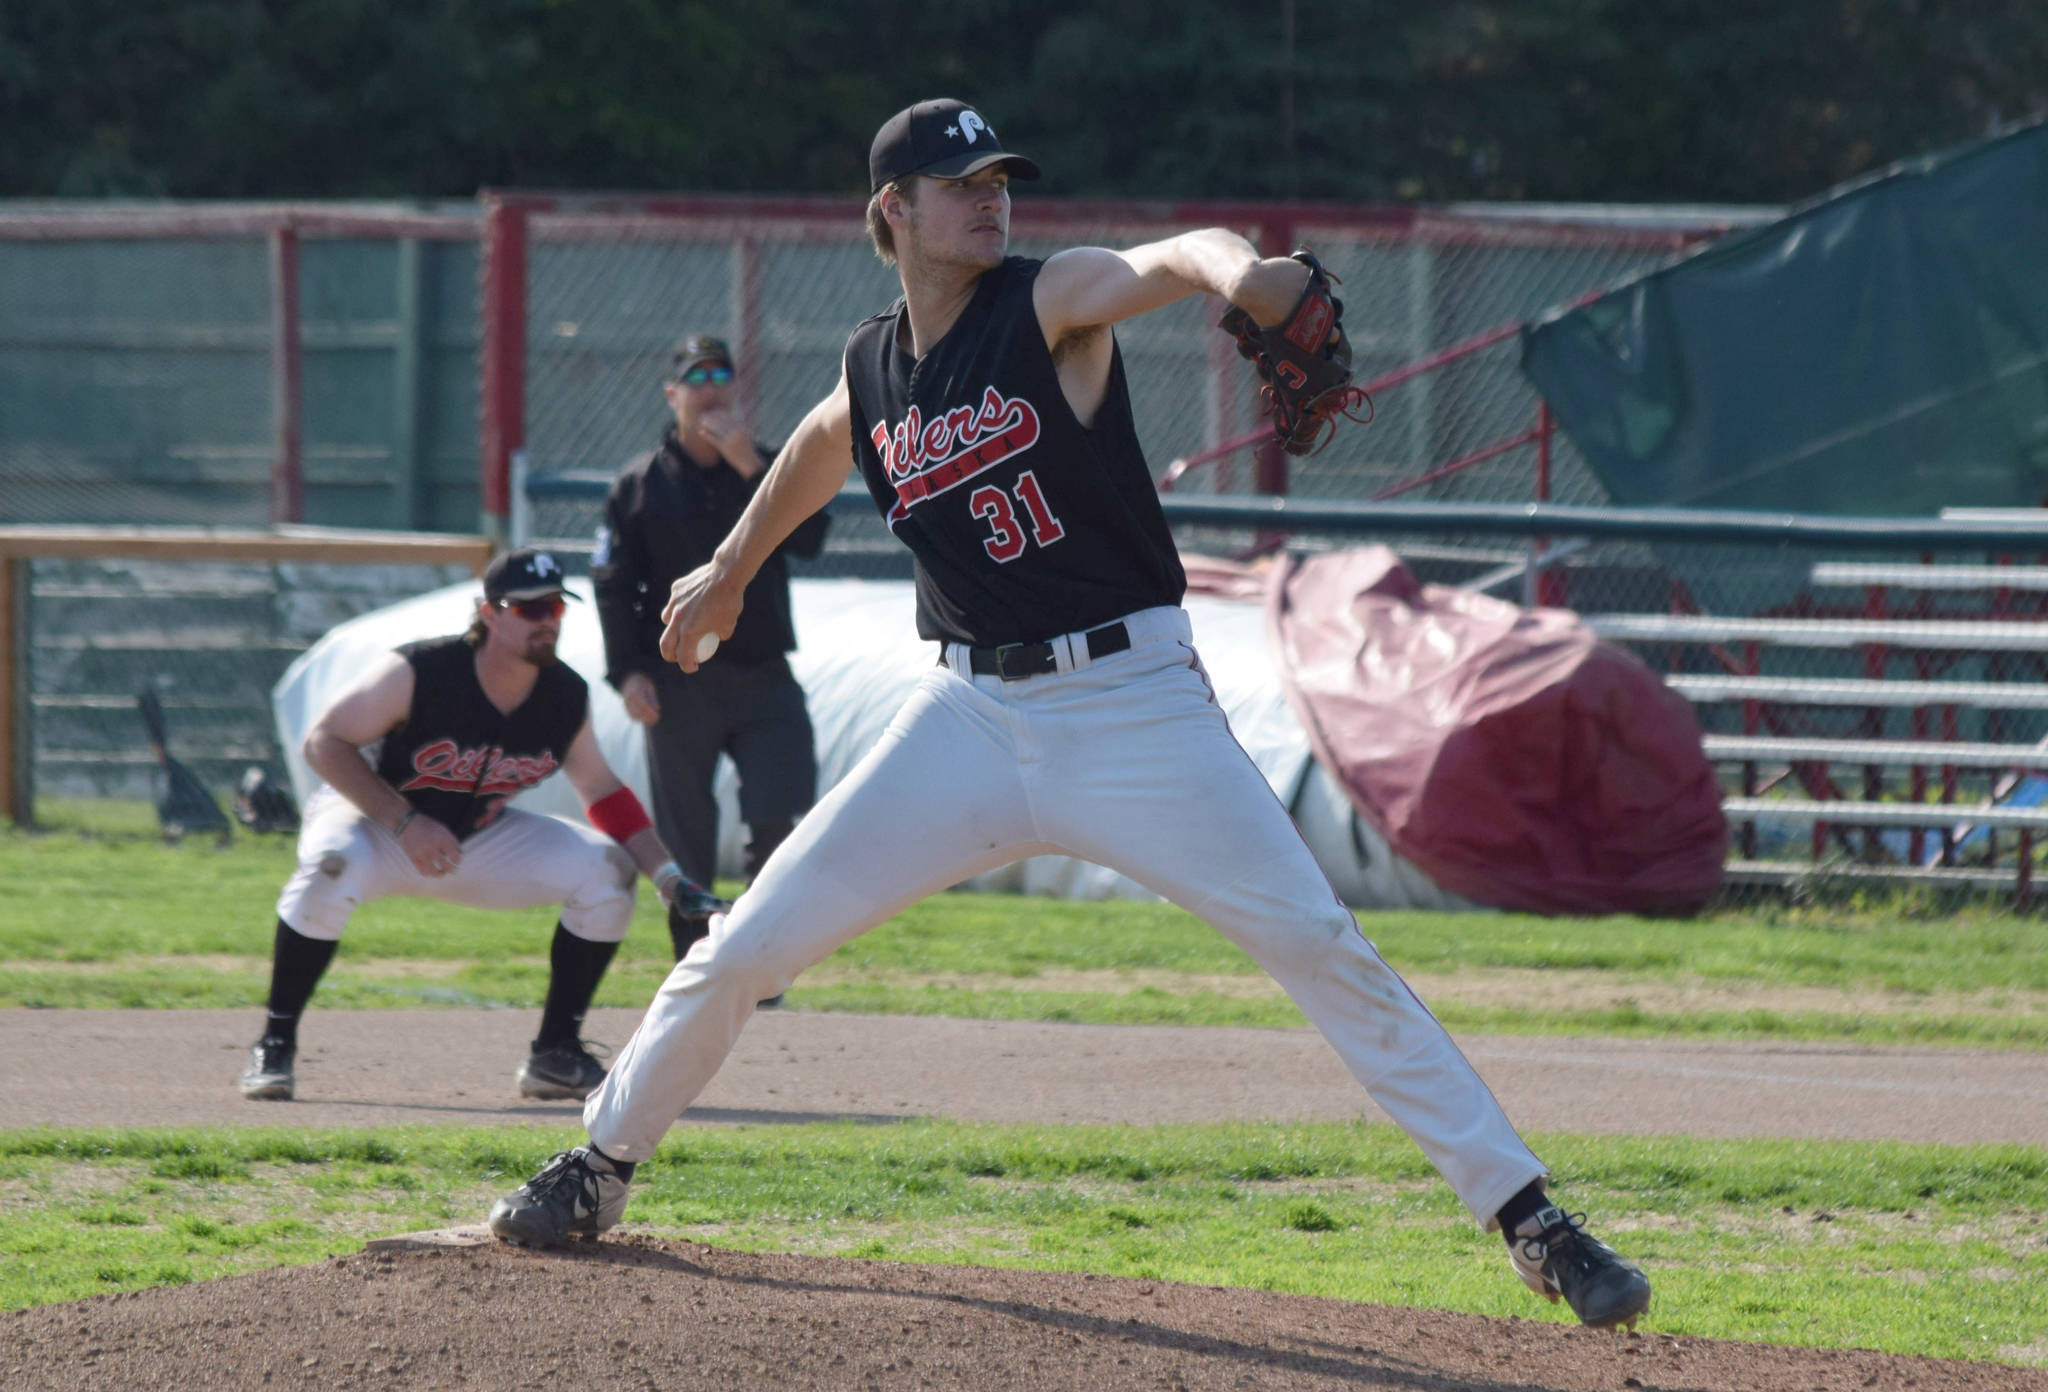 Oilers starting pitcher Luke Yacinich delivers home during the team’s home game against the Chugiak Chinooks at Coral Seymour Memorial Park in Kenai, Alaska, on Wednesday, July 14, 2021. (Camille Botello / Peninsula Clarion)